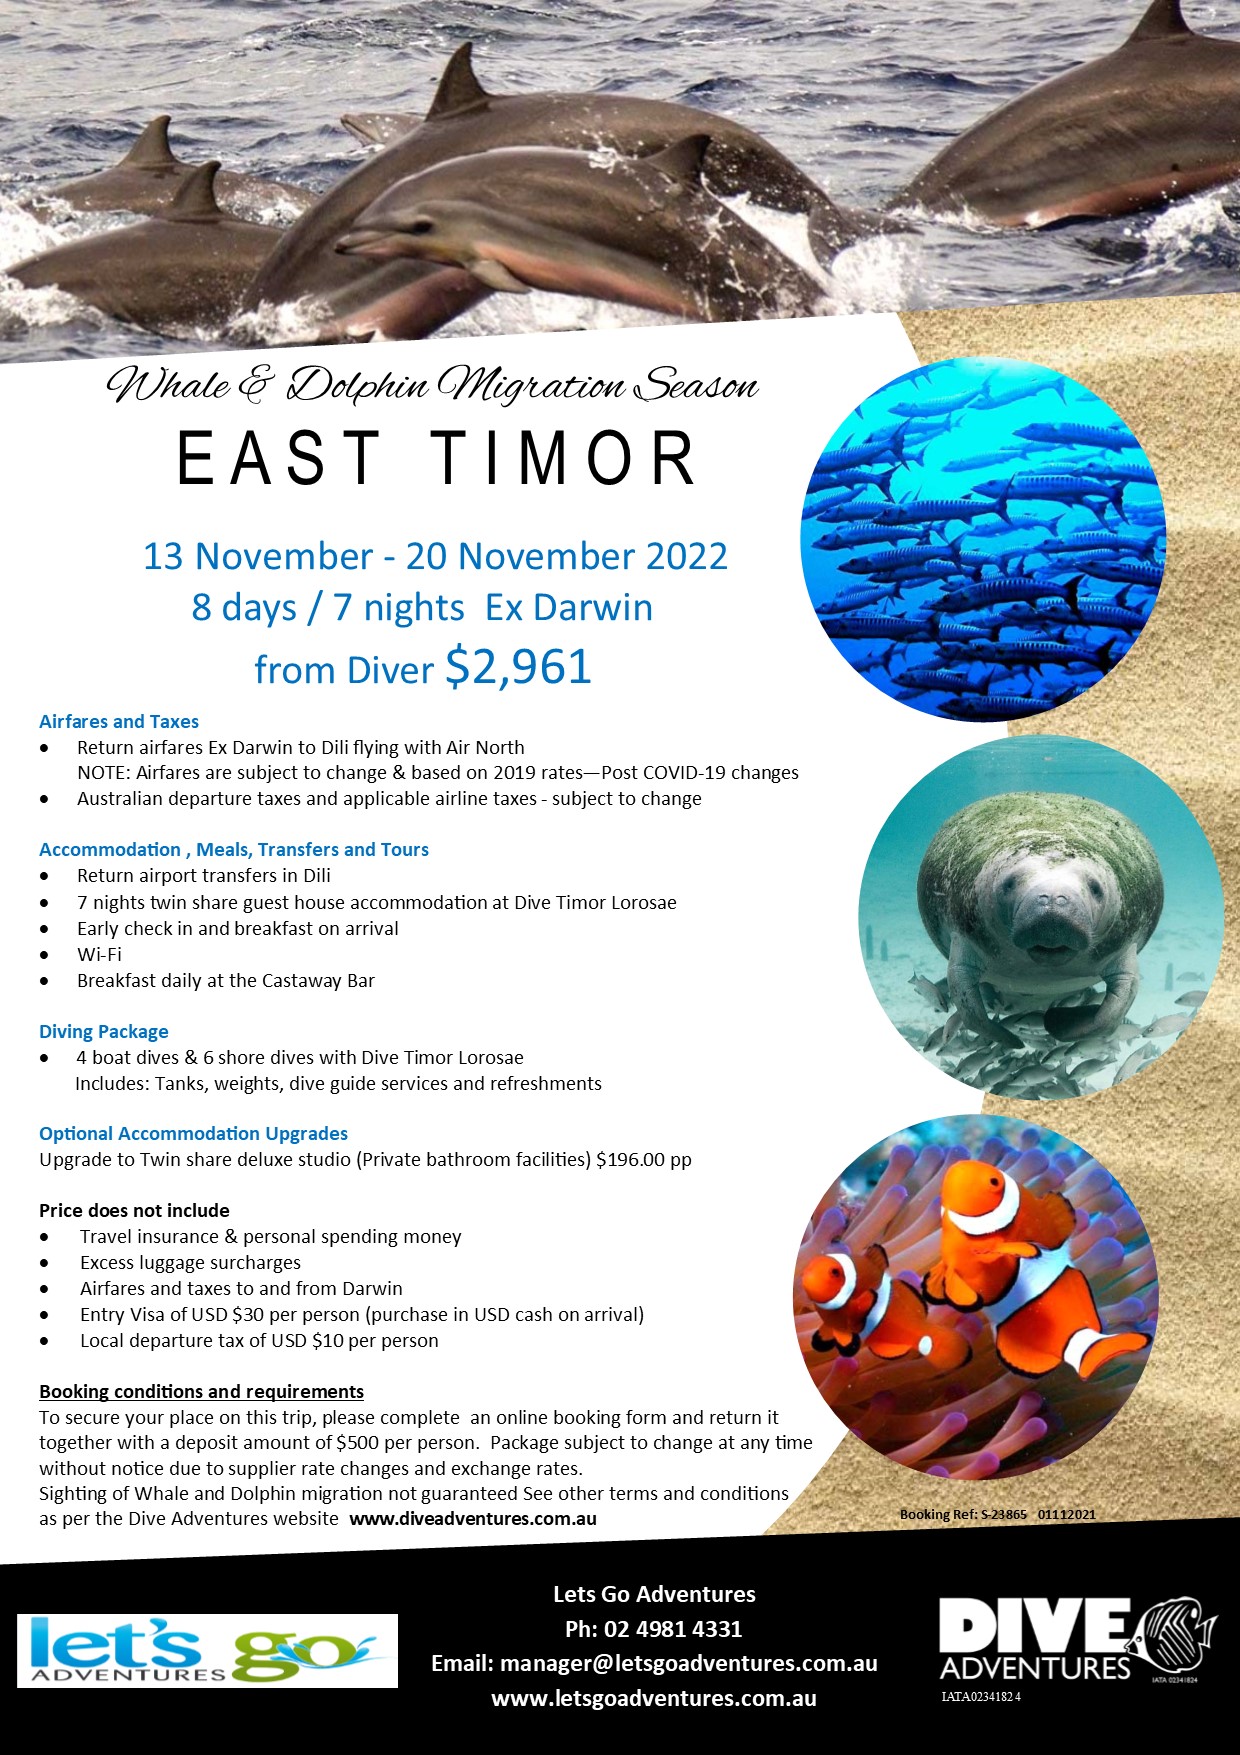 East Timor with Lets Go Adventures